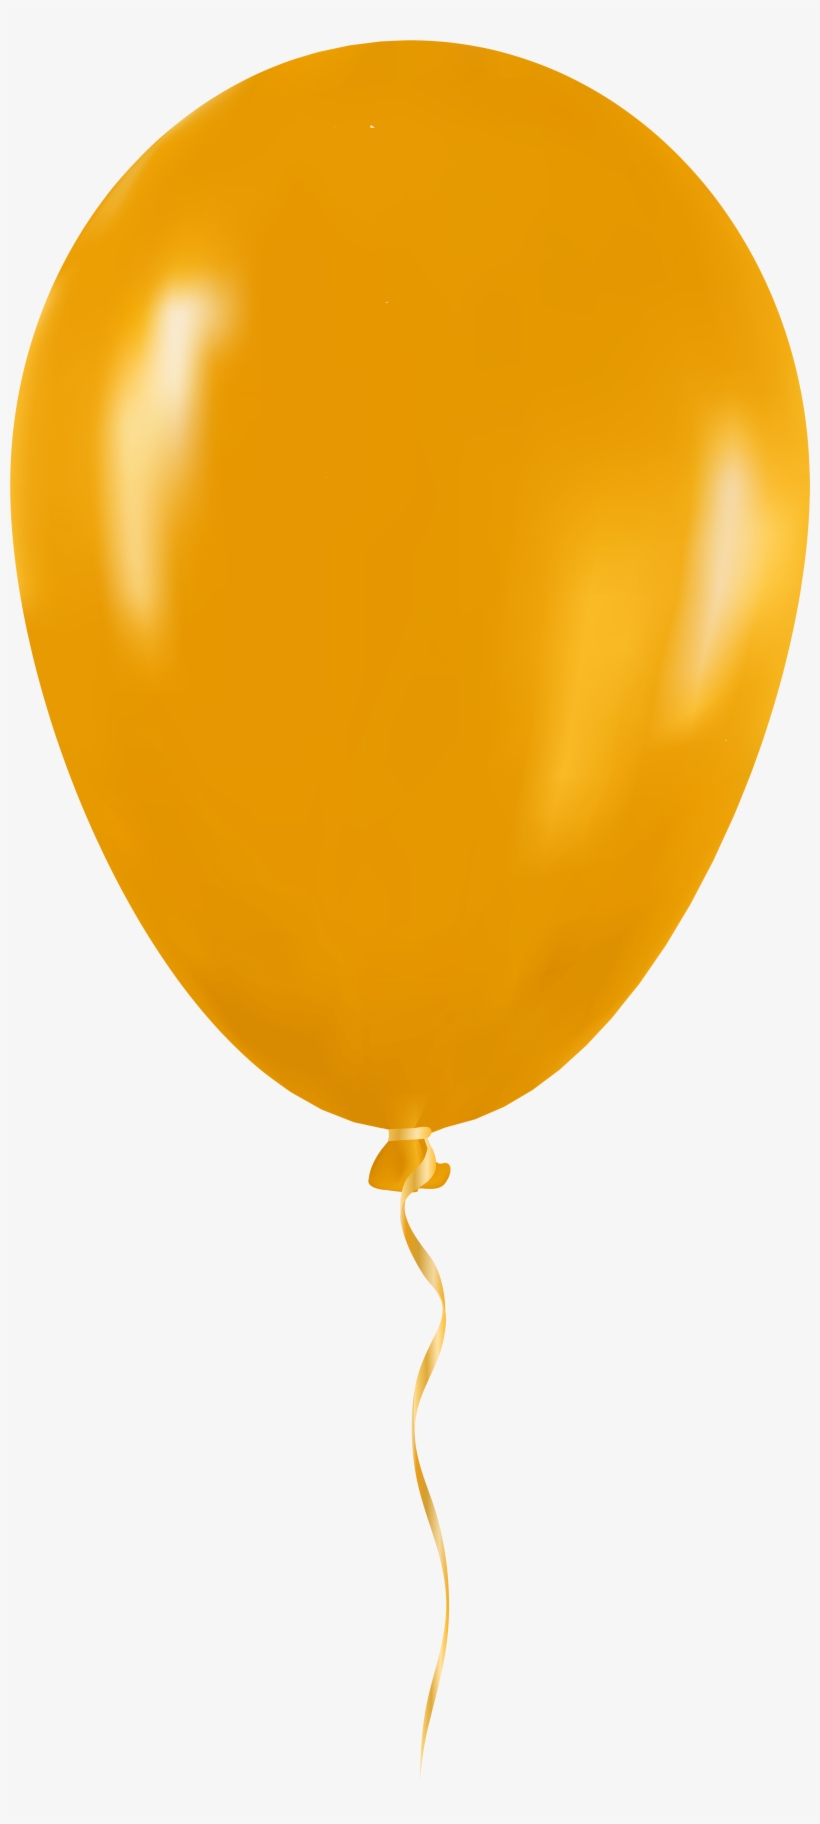 Yellow Balloons Png - Yellow Balloon Transparent Background, transparent png #814838